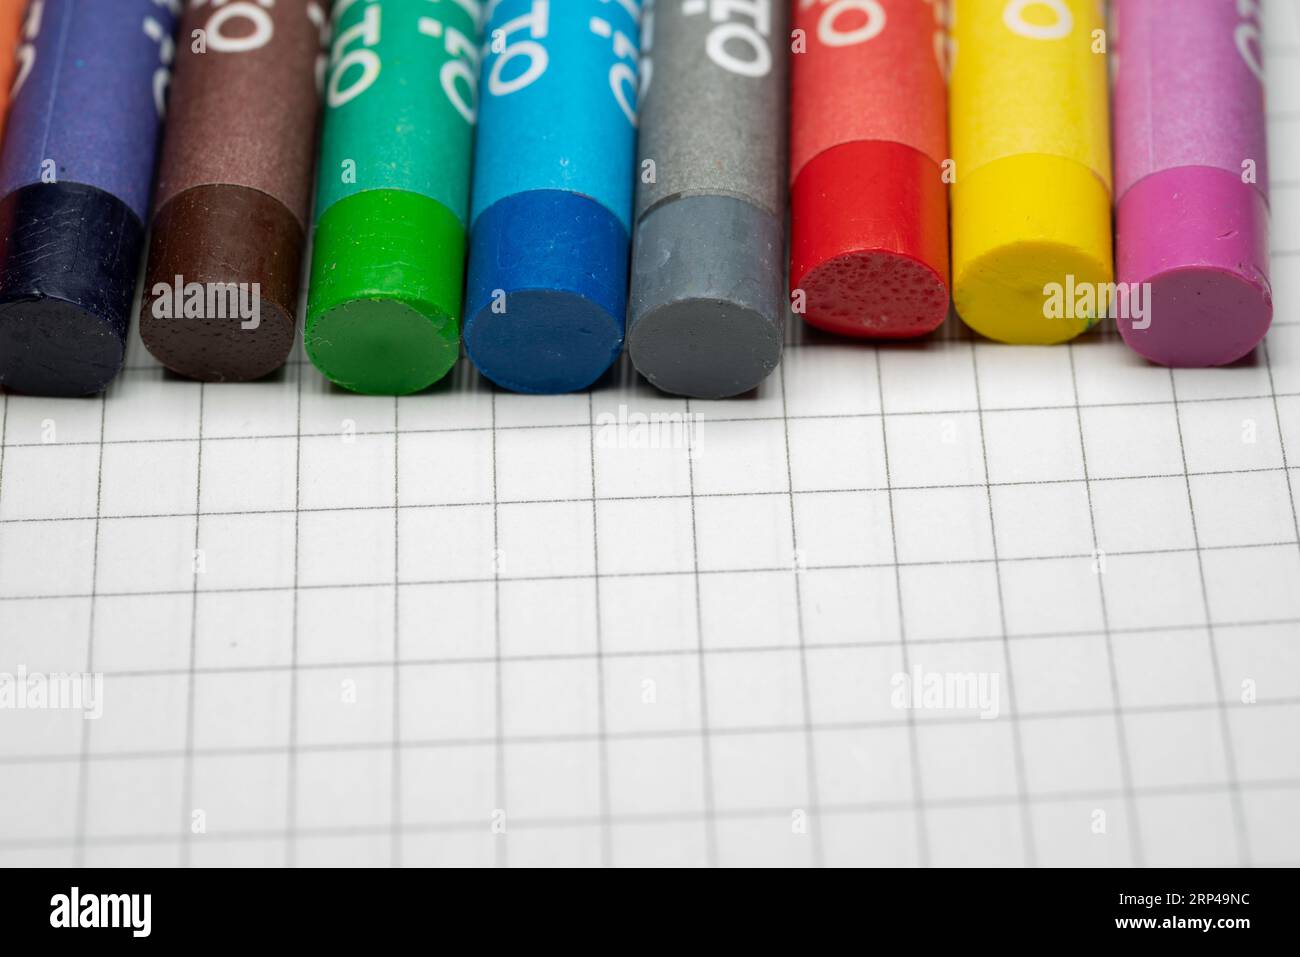 Oil Pastel Crayons on a white paper Stock Photo